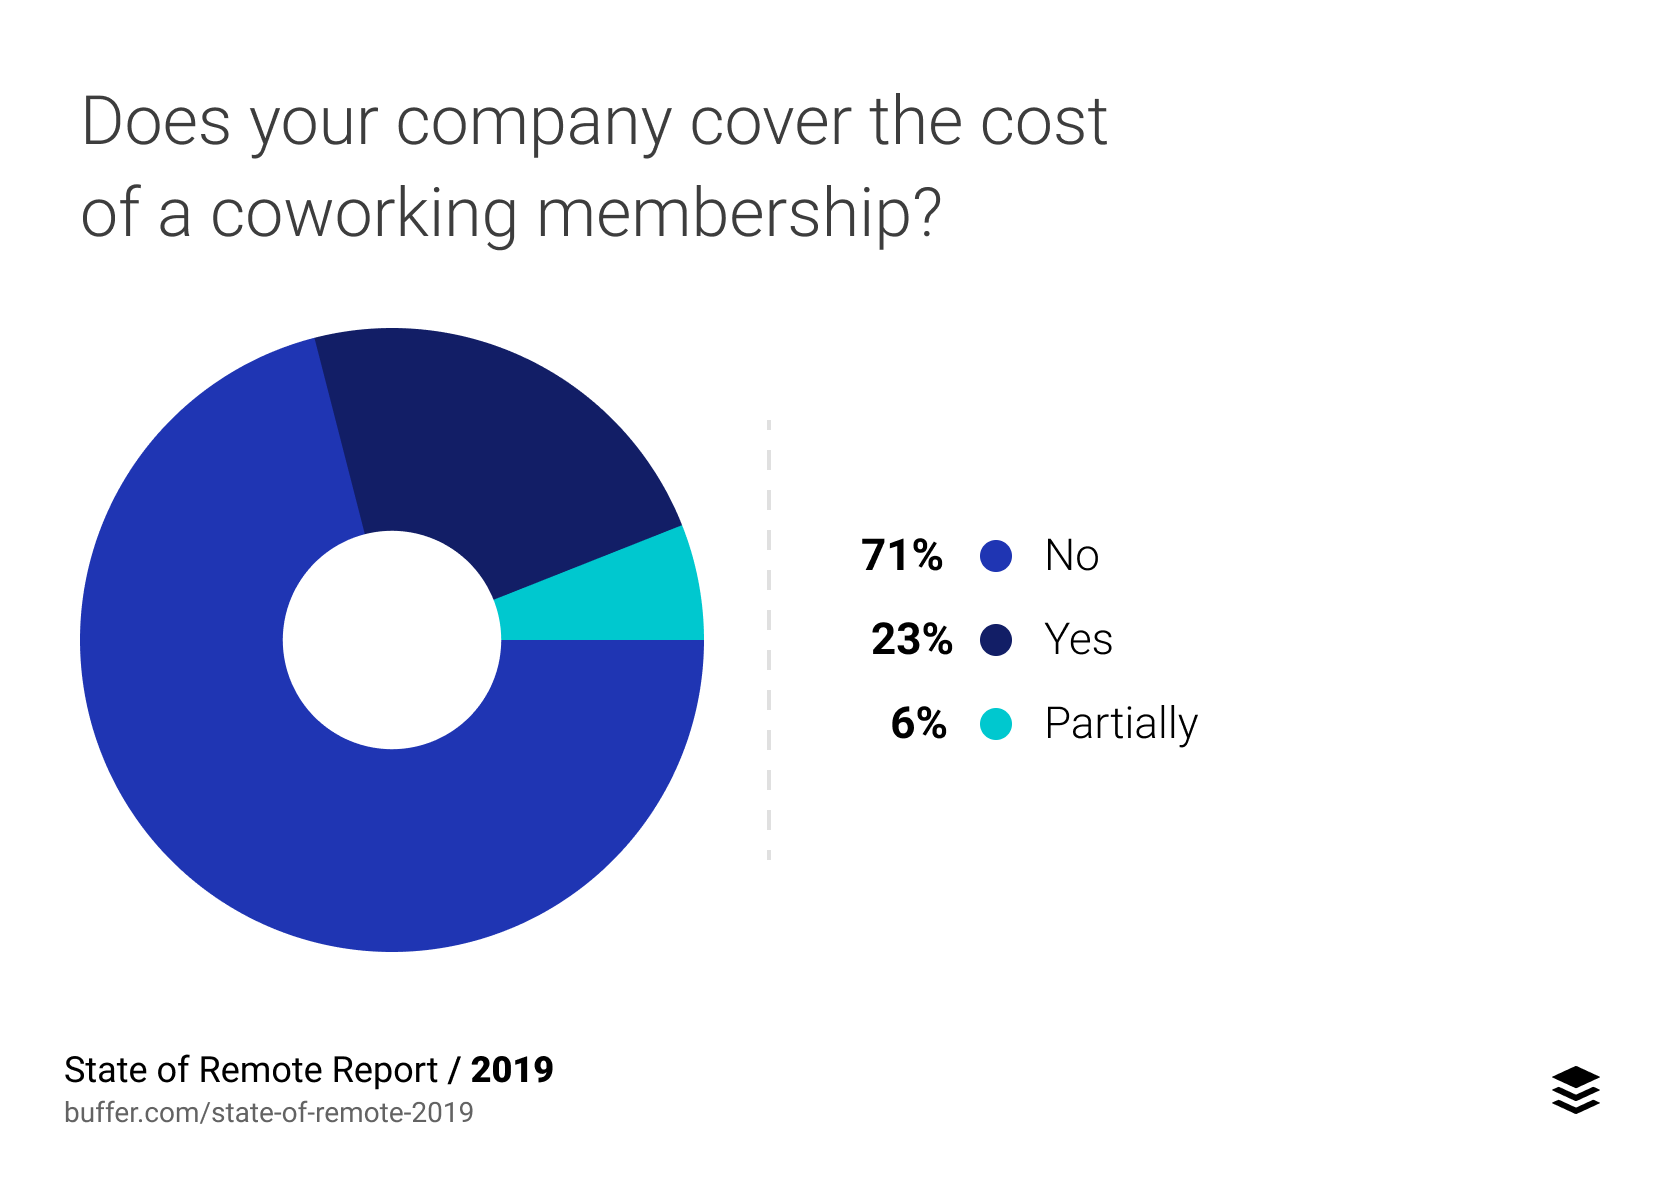 Does your company cover the cost of a coworking membership?